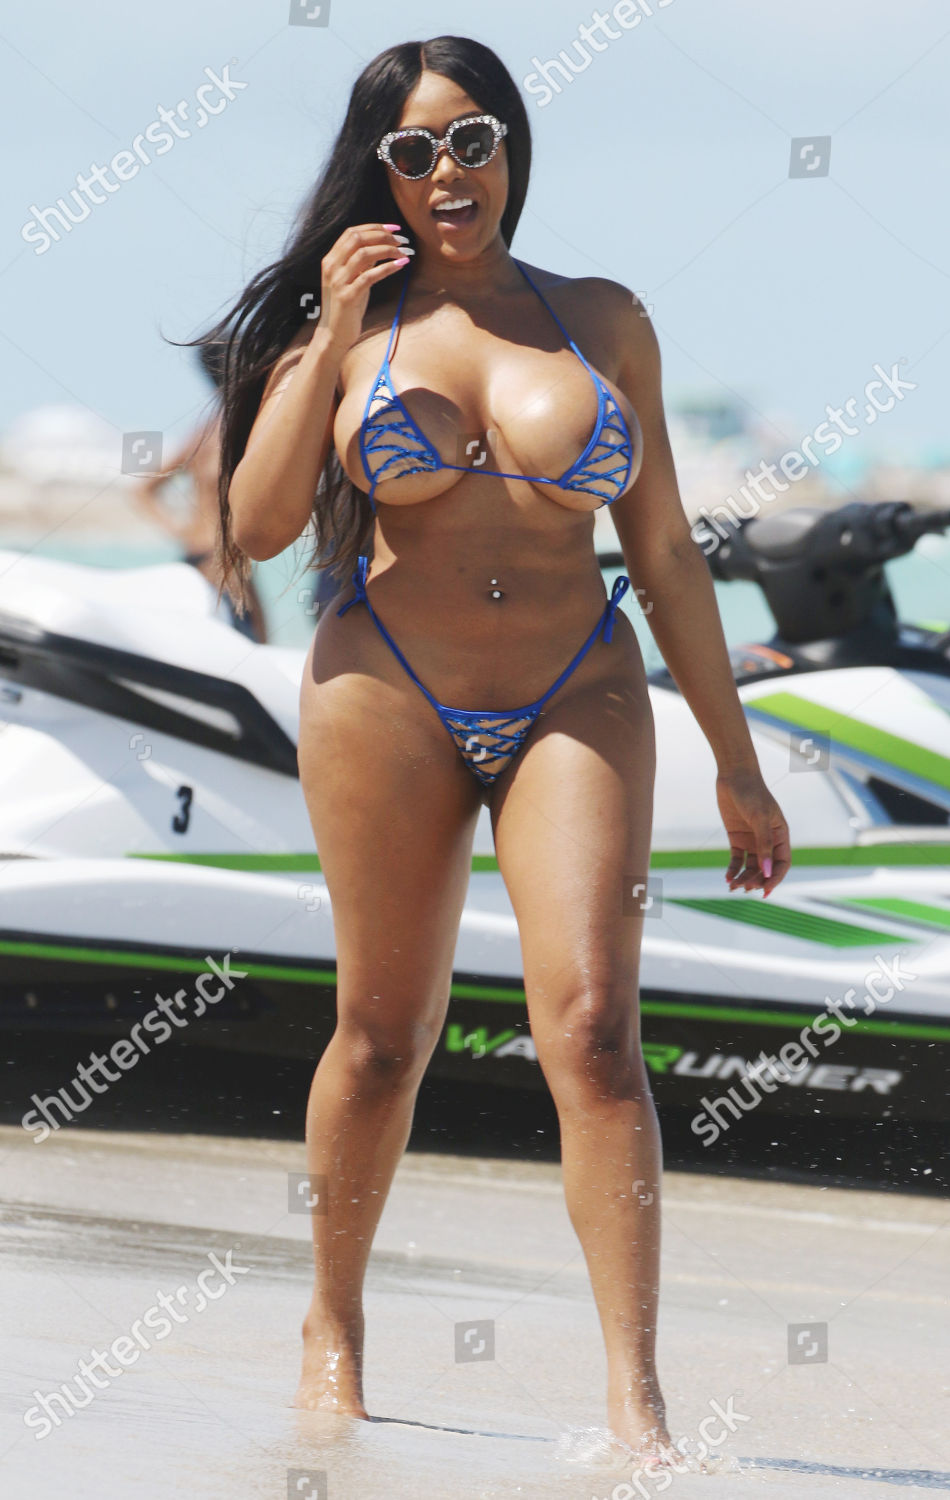 Moriah Mills Editorial Stock Photo Stock Image Shutterstock Full information about instagram model moriah mills. https www shutterstock com editorial image editorial moriah mills out and about miami florida usa 06 may 2018 9664638b